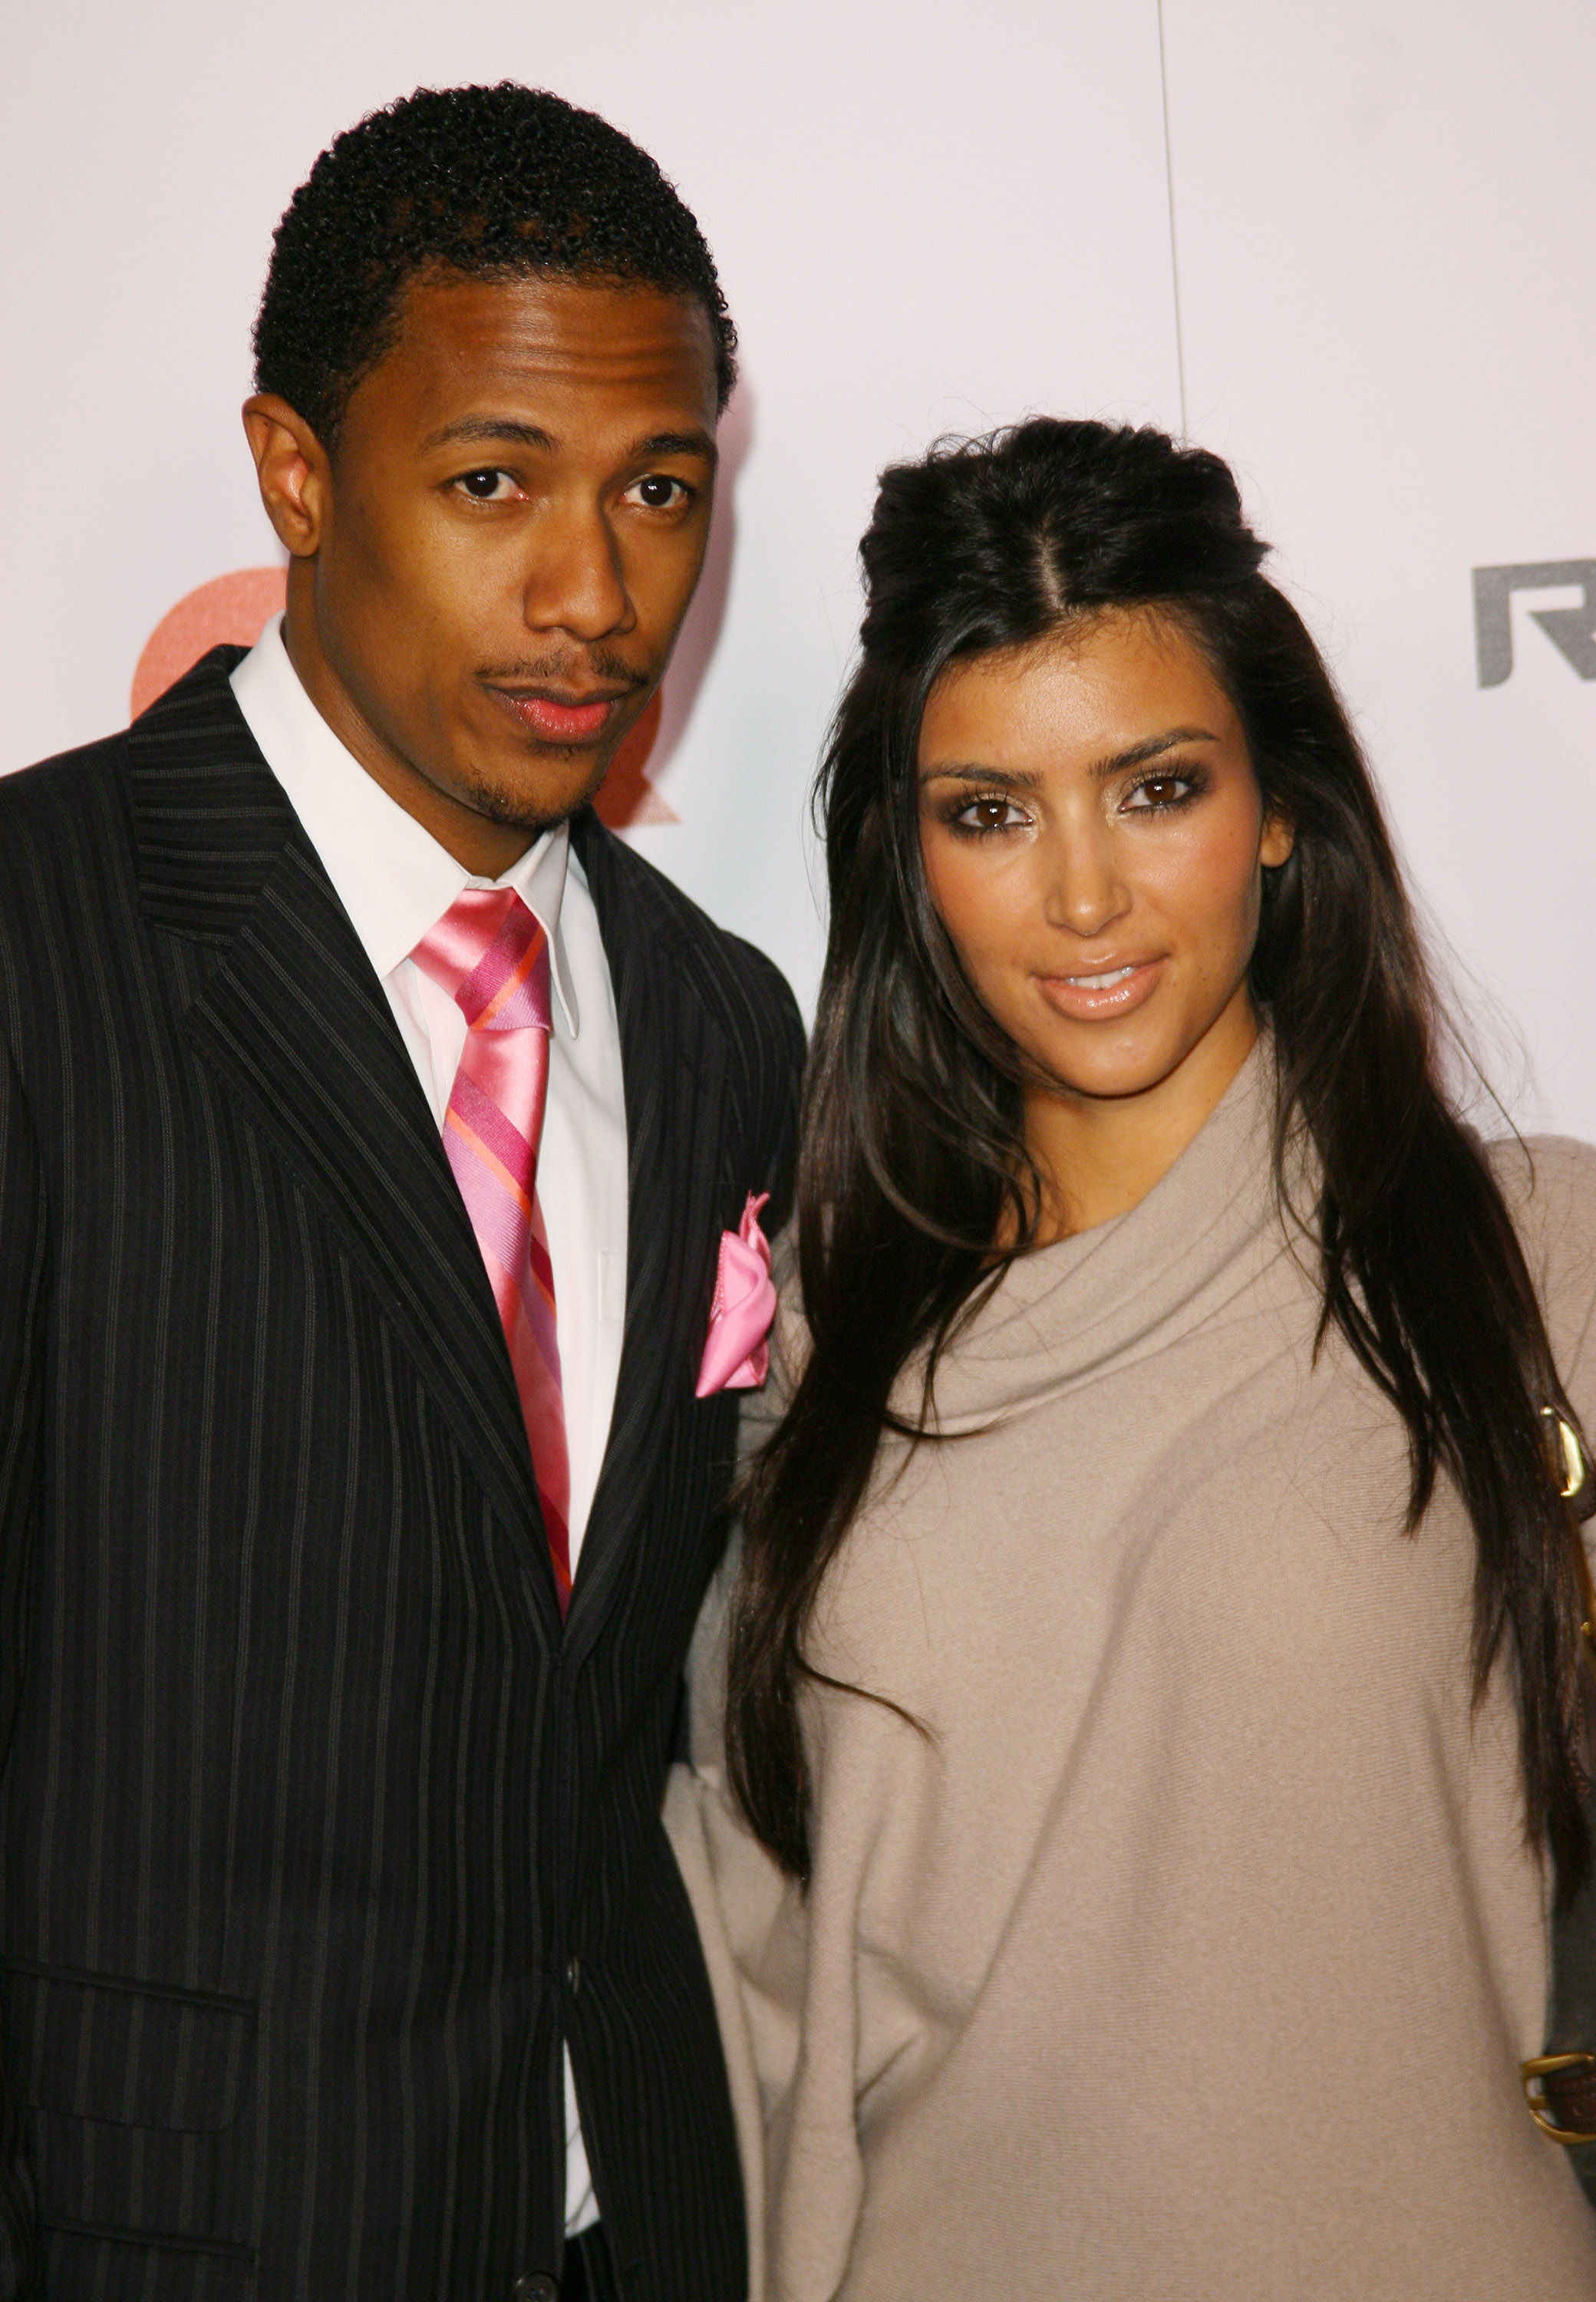 Has nick dated who cannon Nick Cannon's